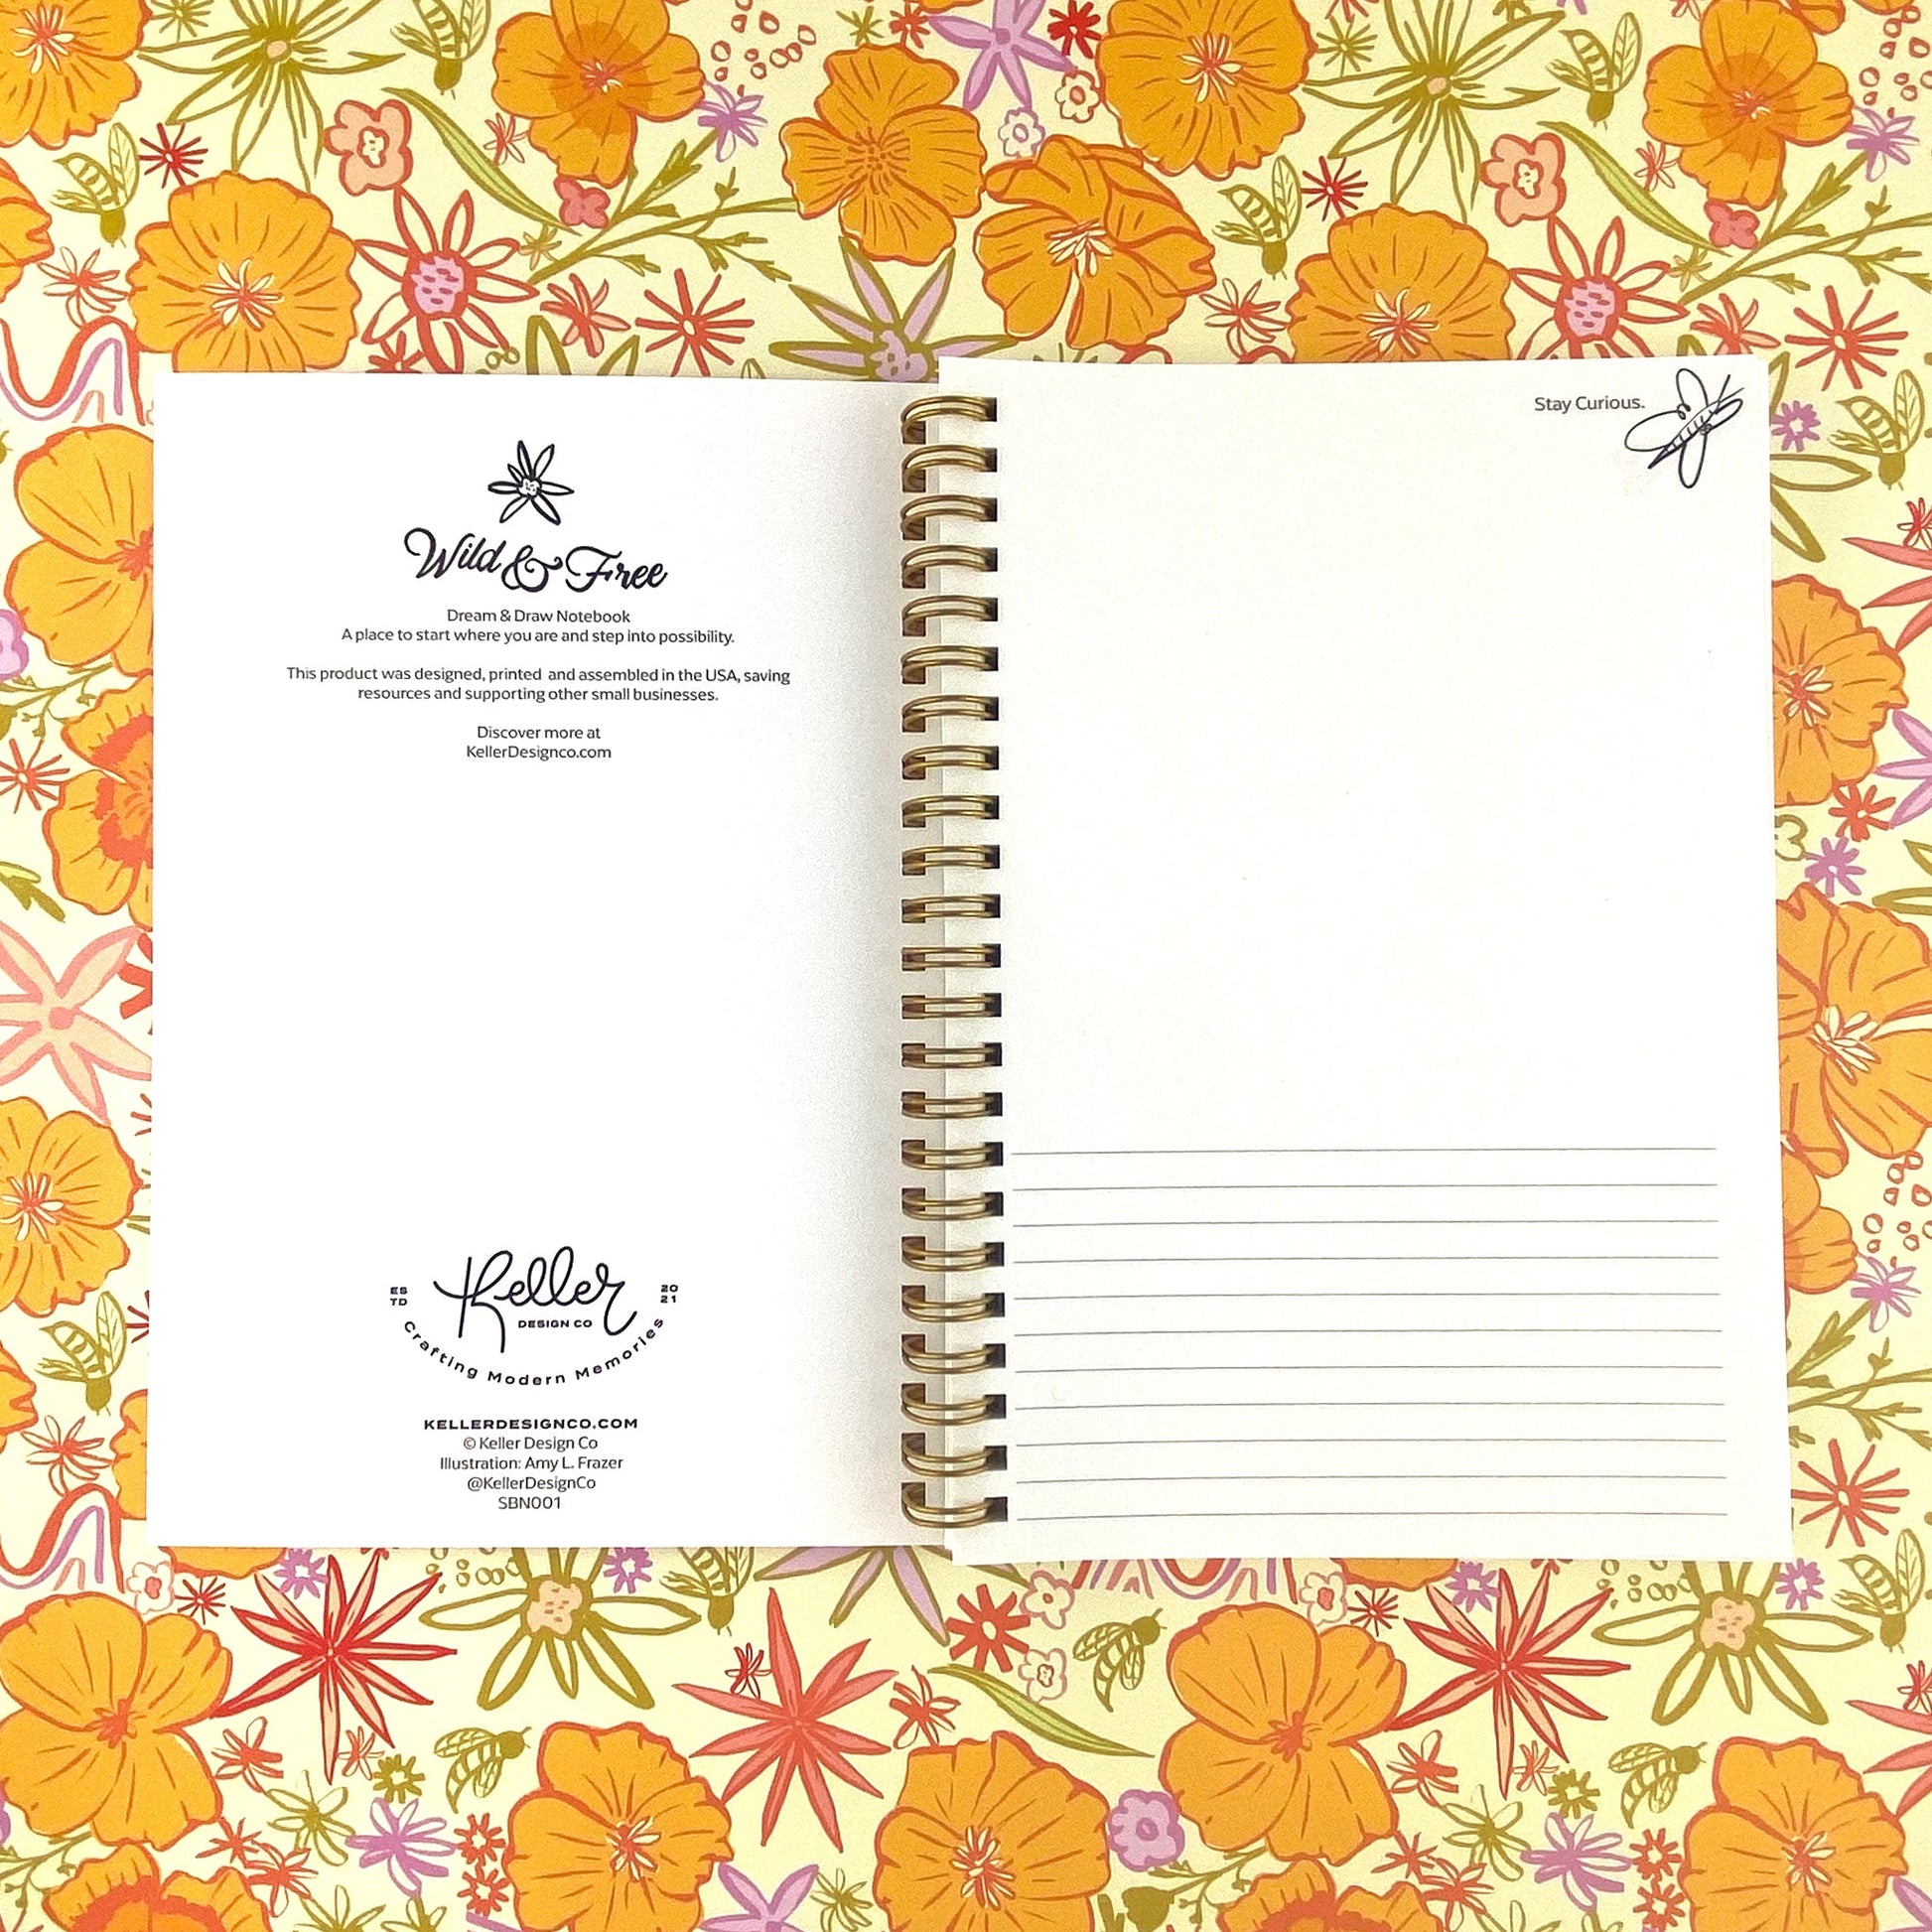 Spiral Bound Notebook with hand drawn colorful poppies and wildflowers in tones of orange , red, lavender and gold on a cream background. In the center is the handlettered phrase Wild and Free on a cream colored banner.